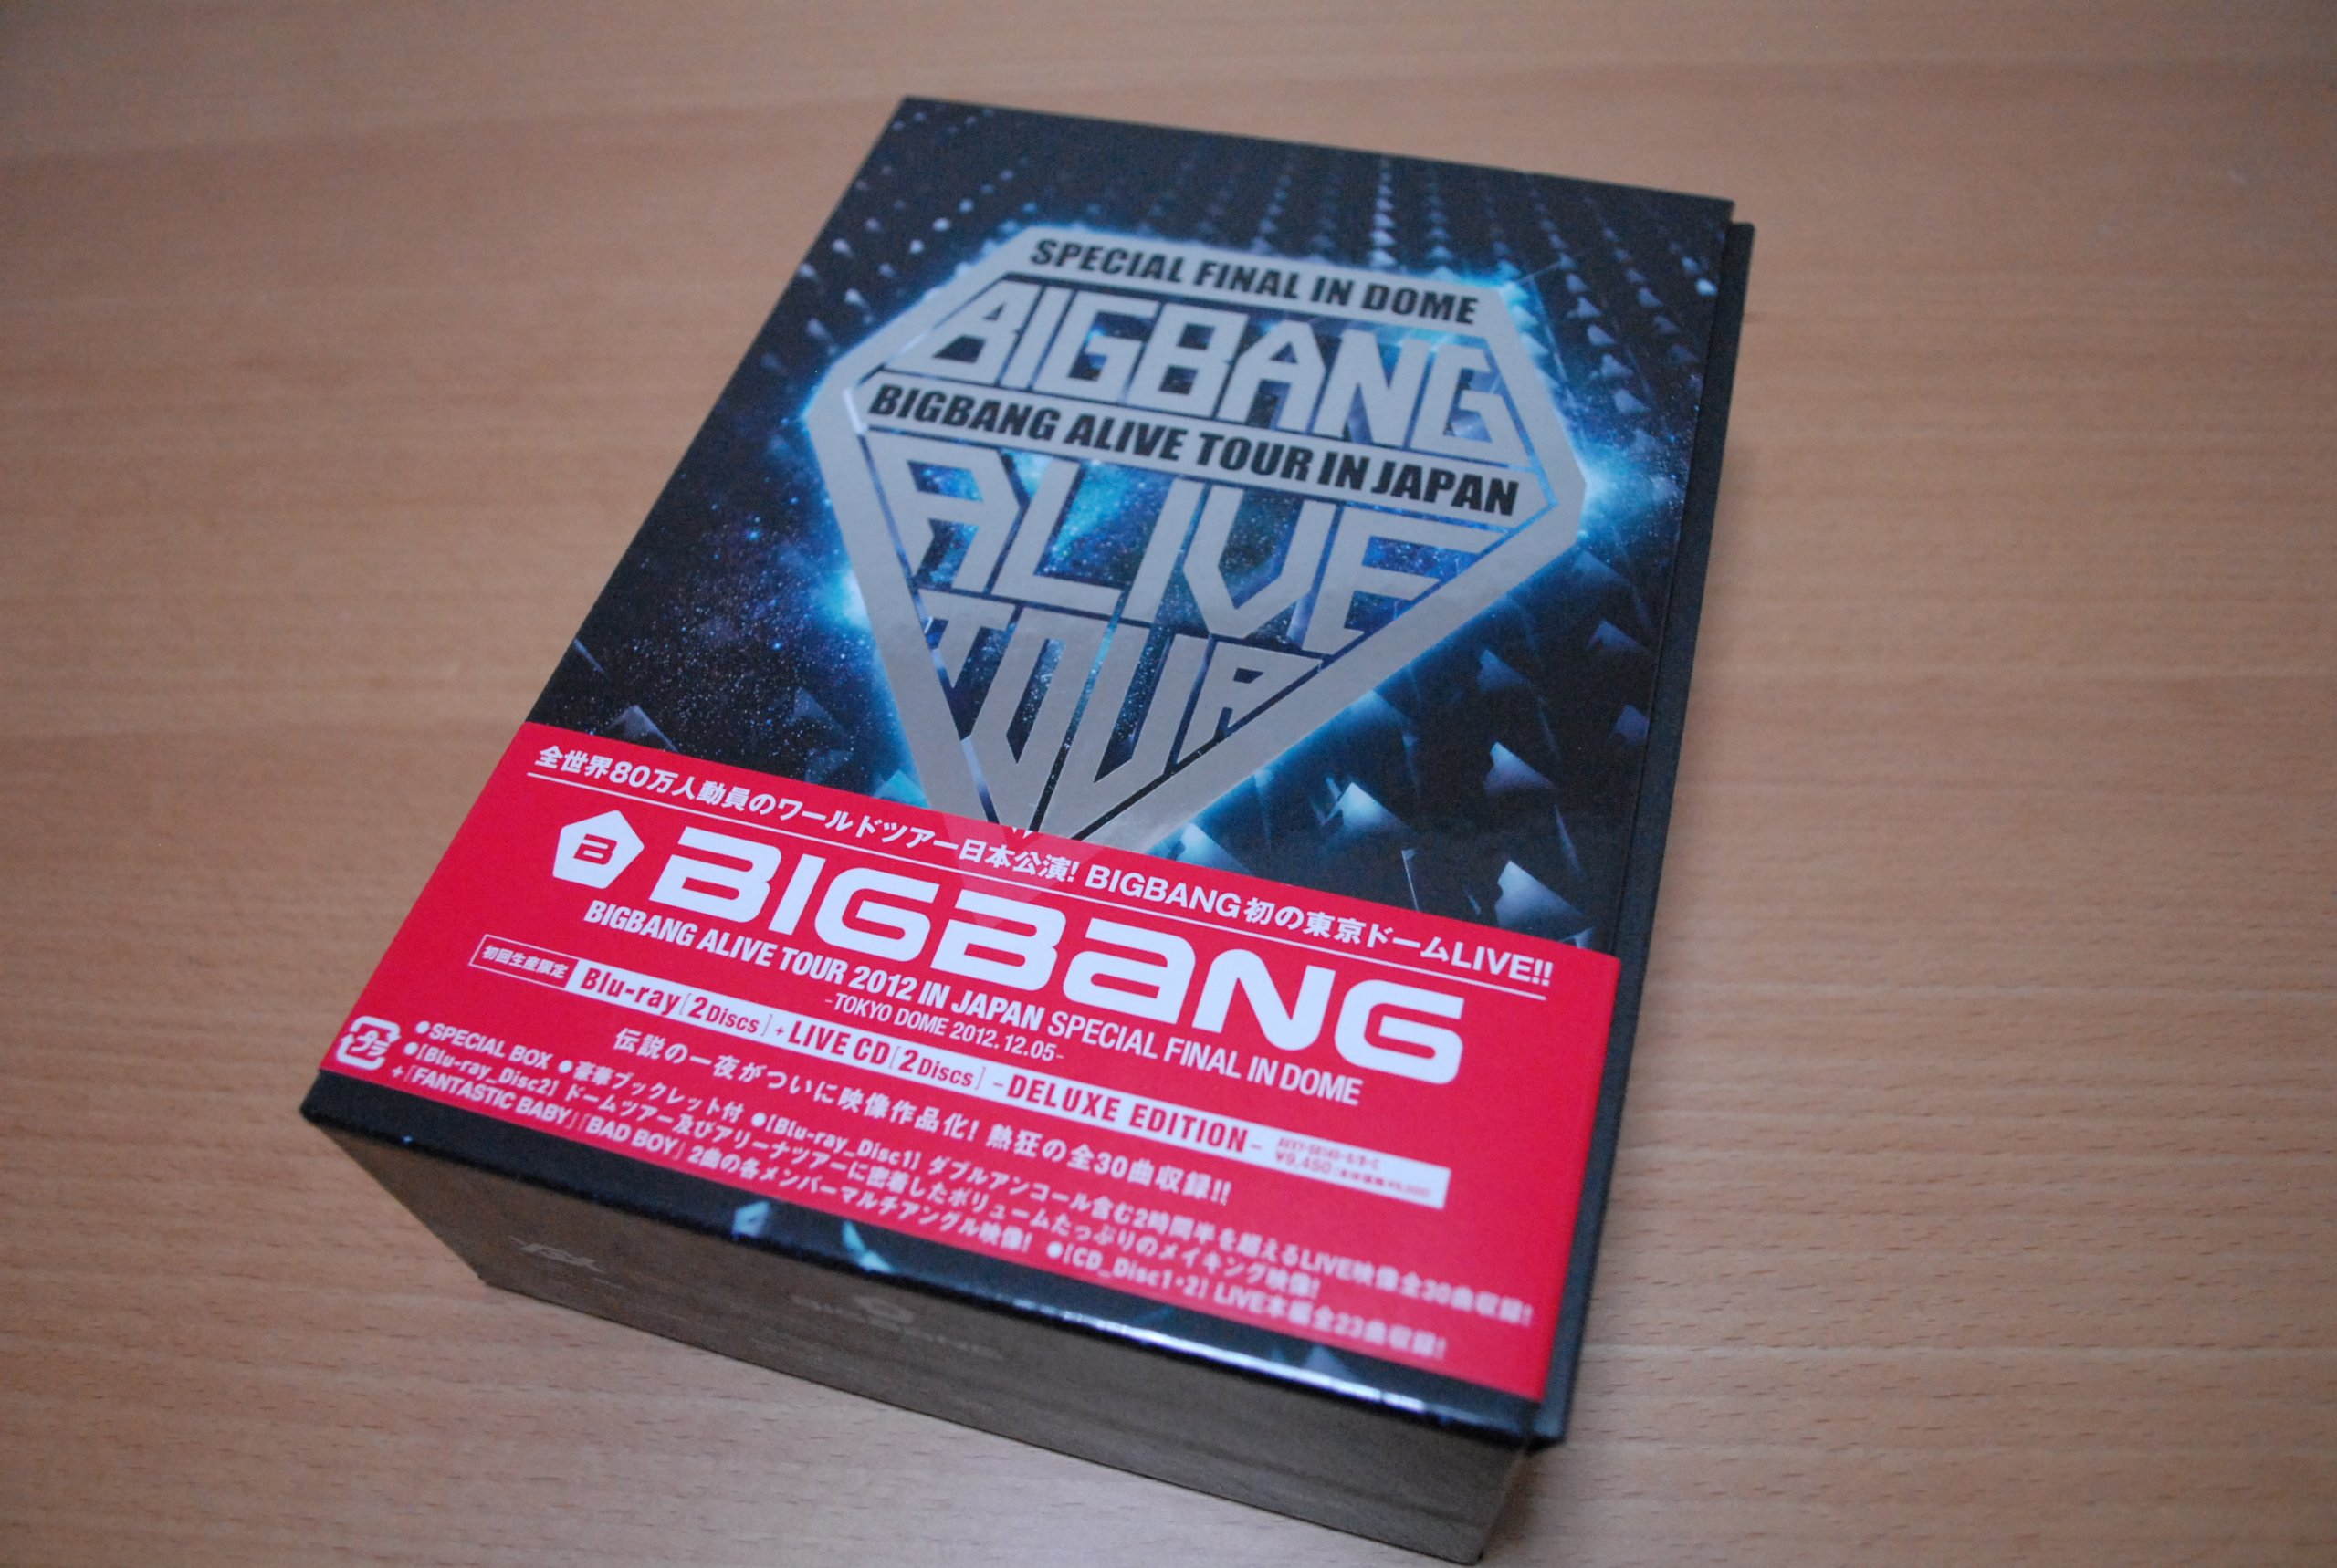 BIGBANG ALIVE TOUR 2012 IN JAPAN SPECIAL FINAL IN DOME -TOKYO DOME 2012.12.05- (Blu-ray Disc2枚組+AL2枚組) (初回生産限定盤)